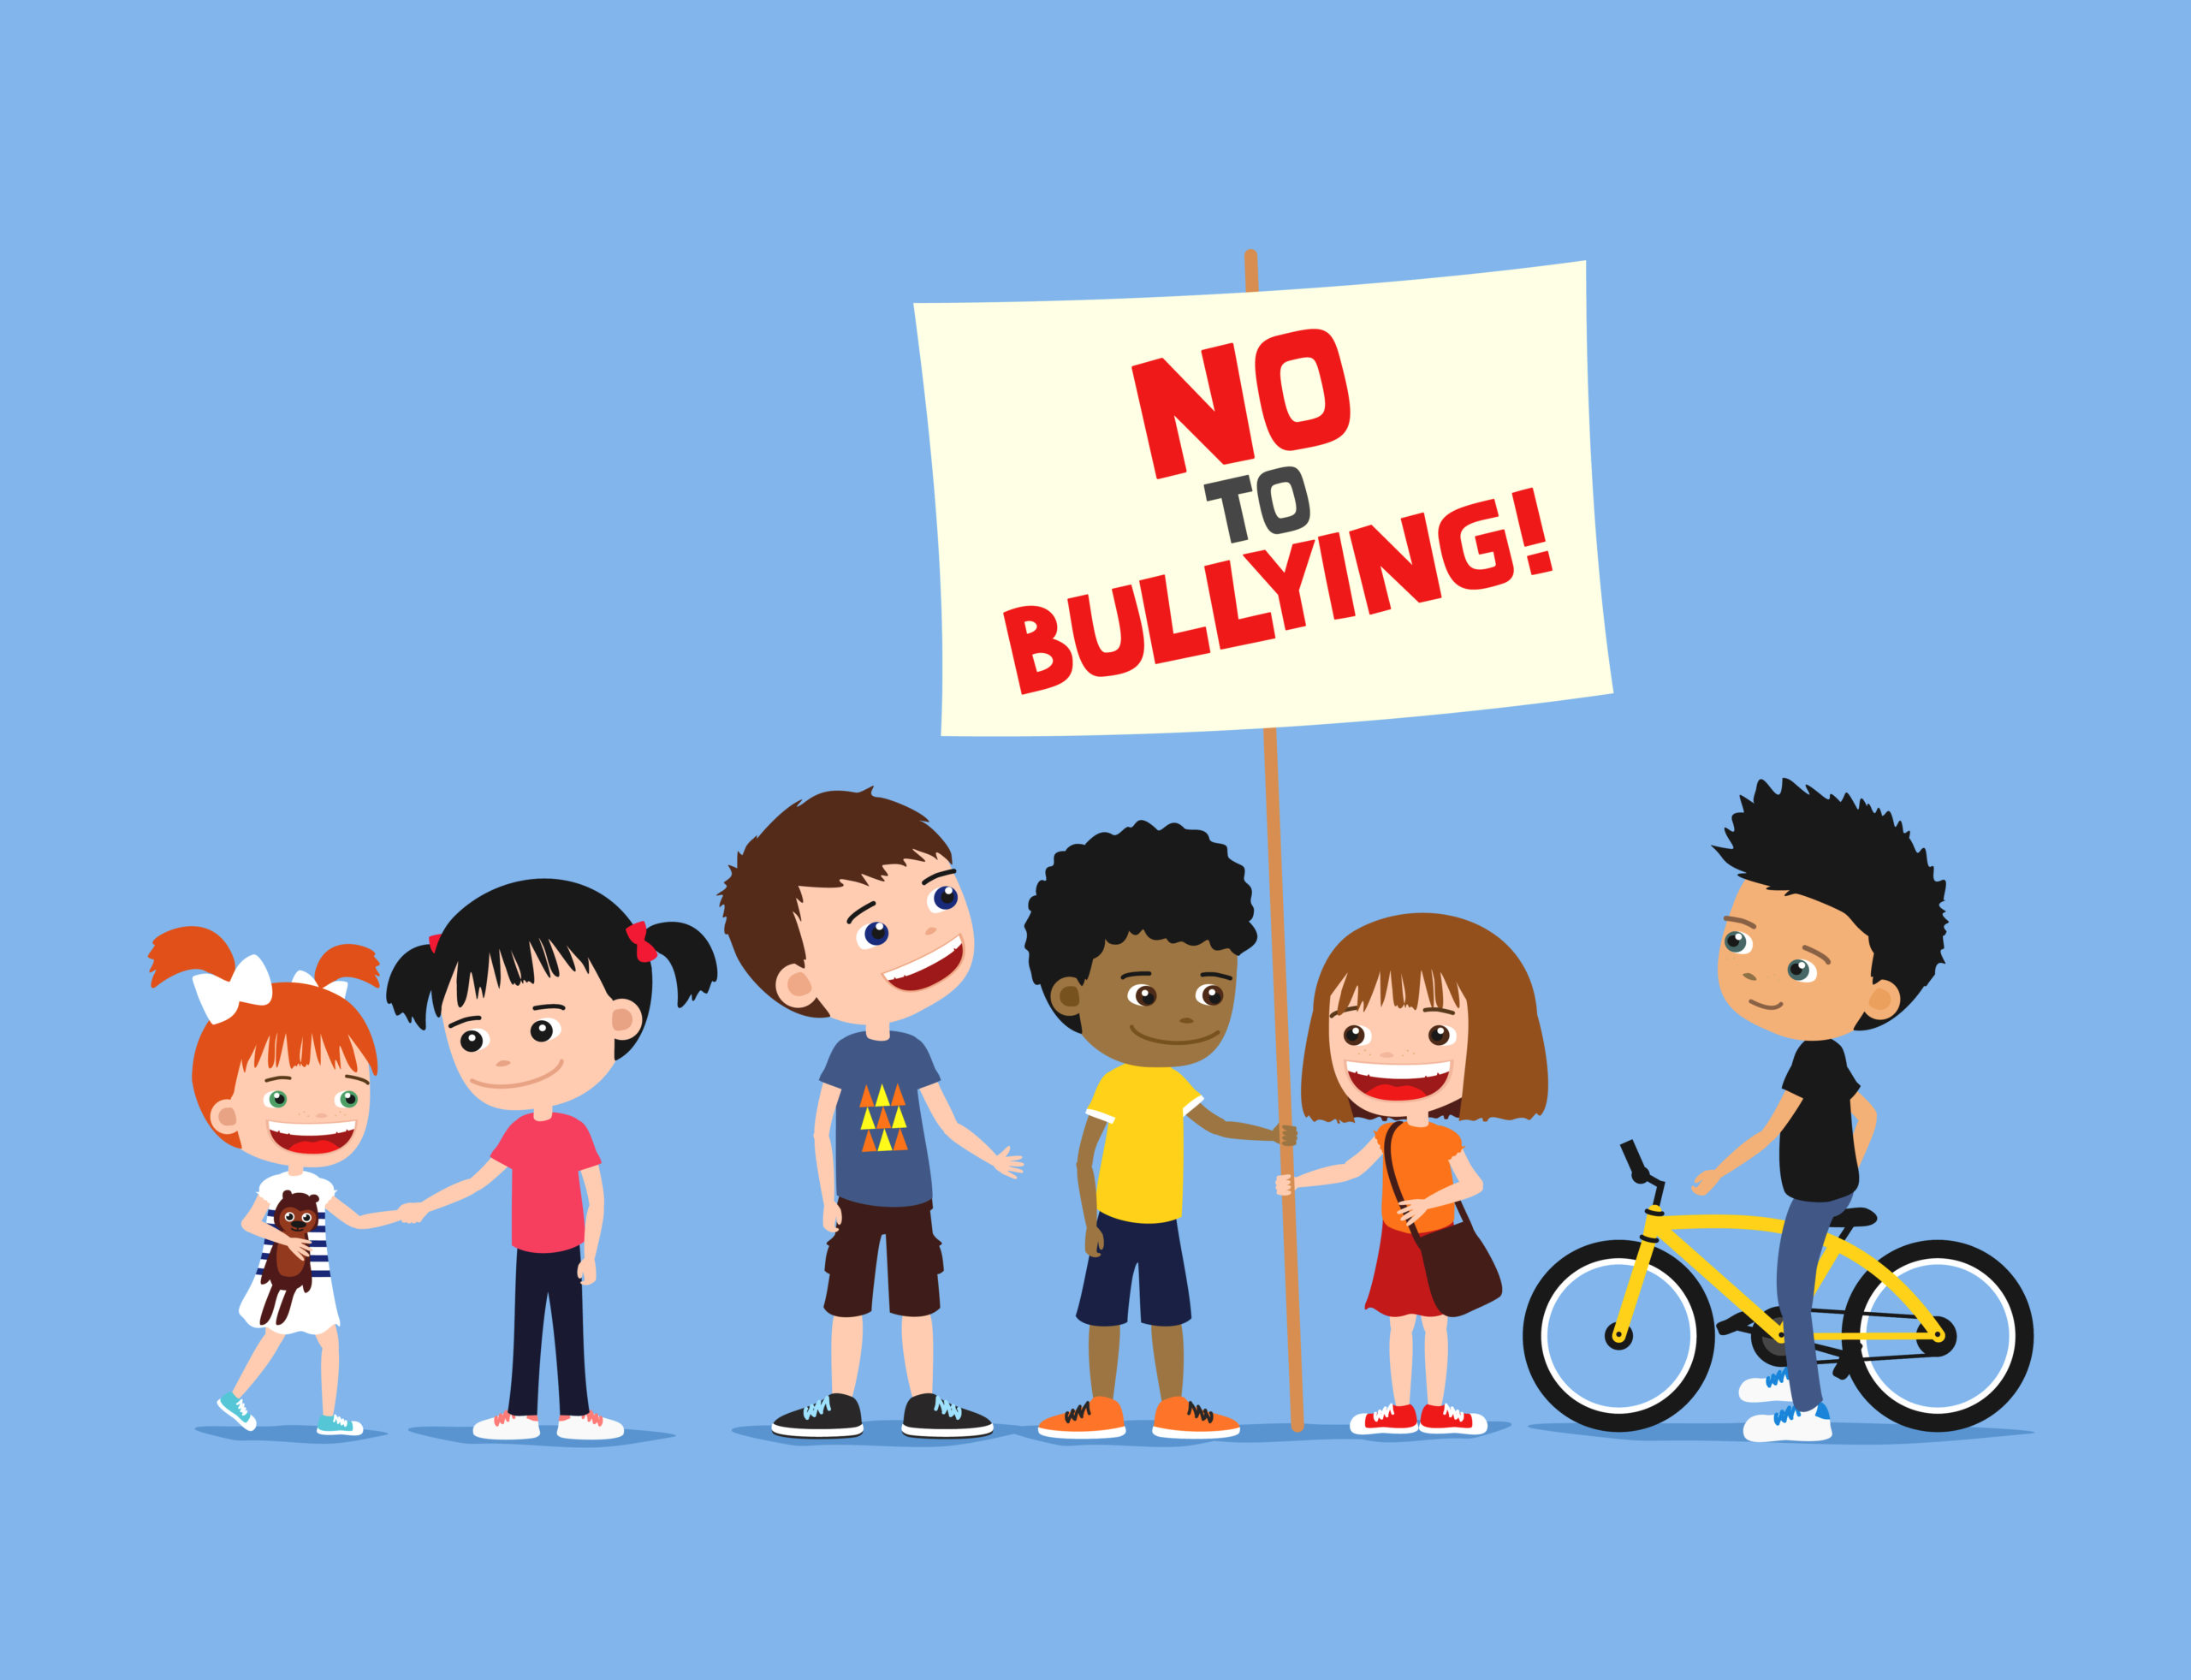 Take a Stand Against Bullying